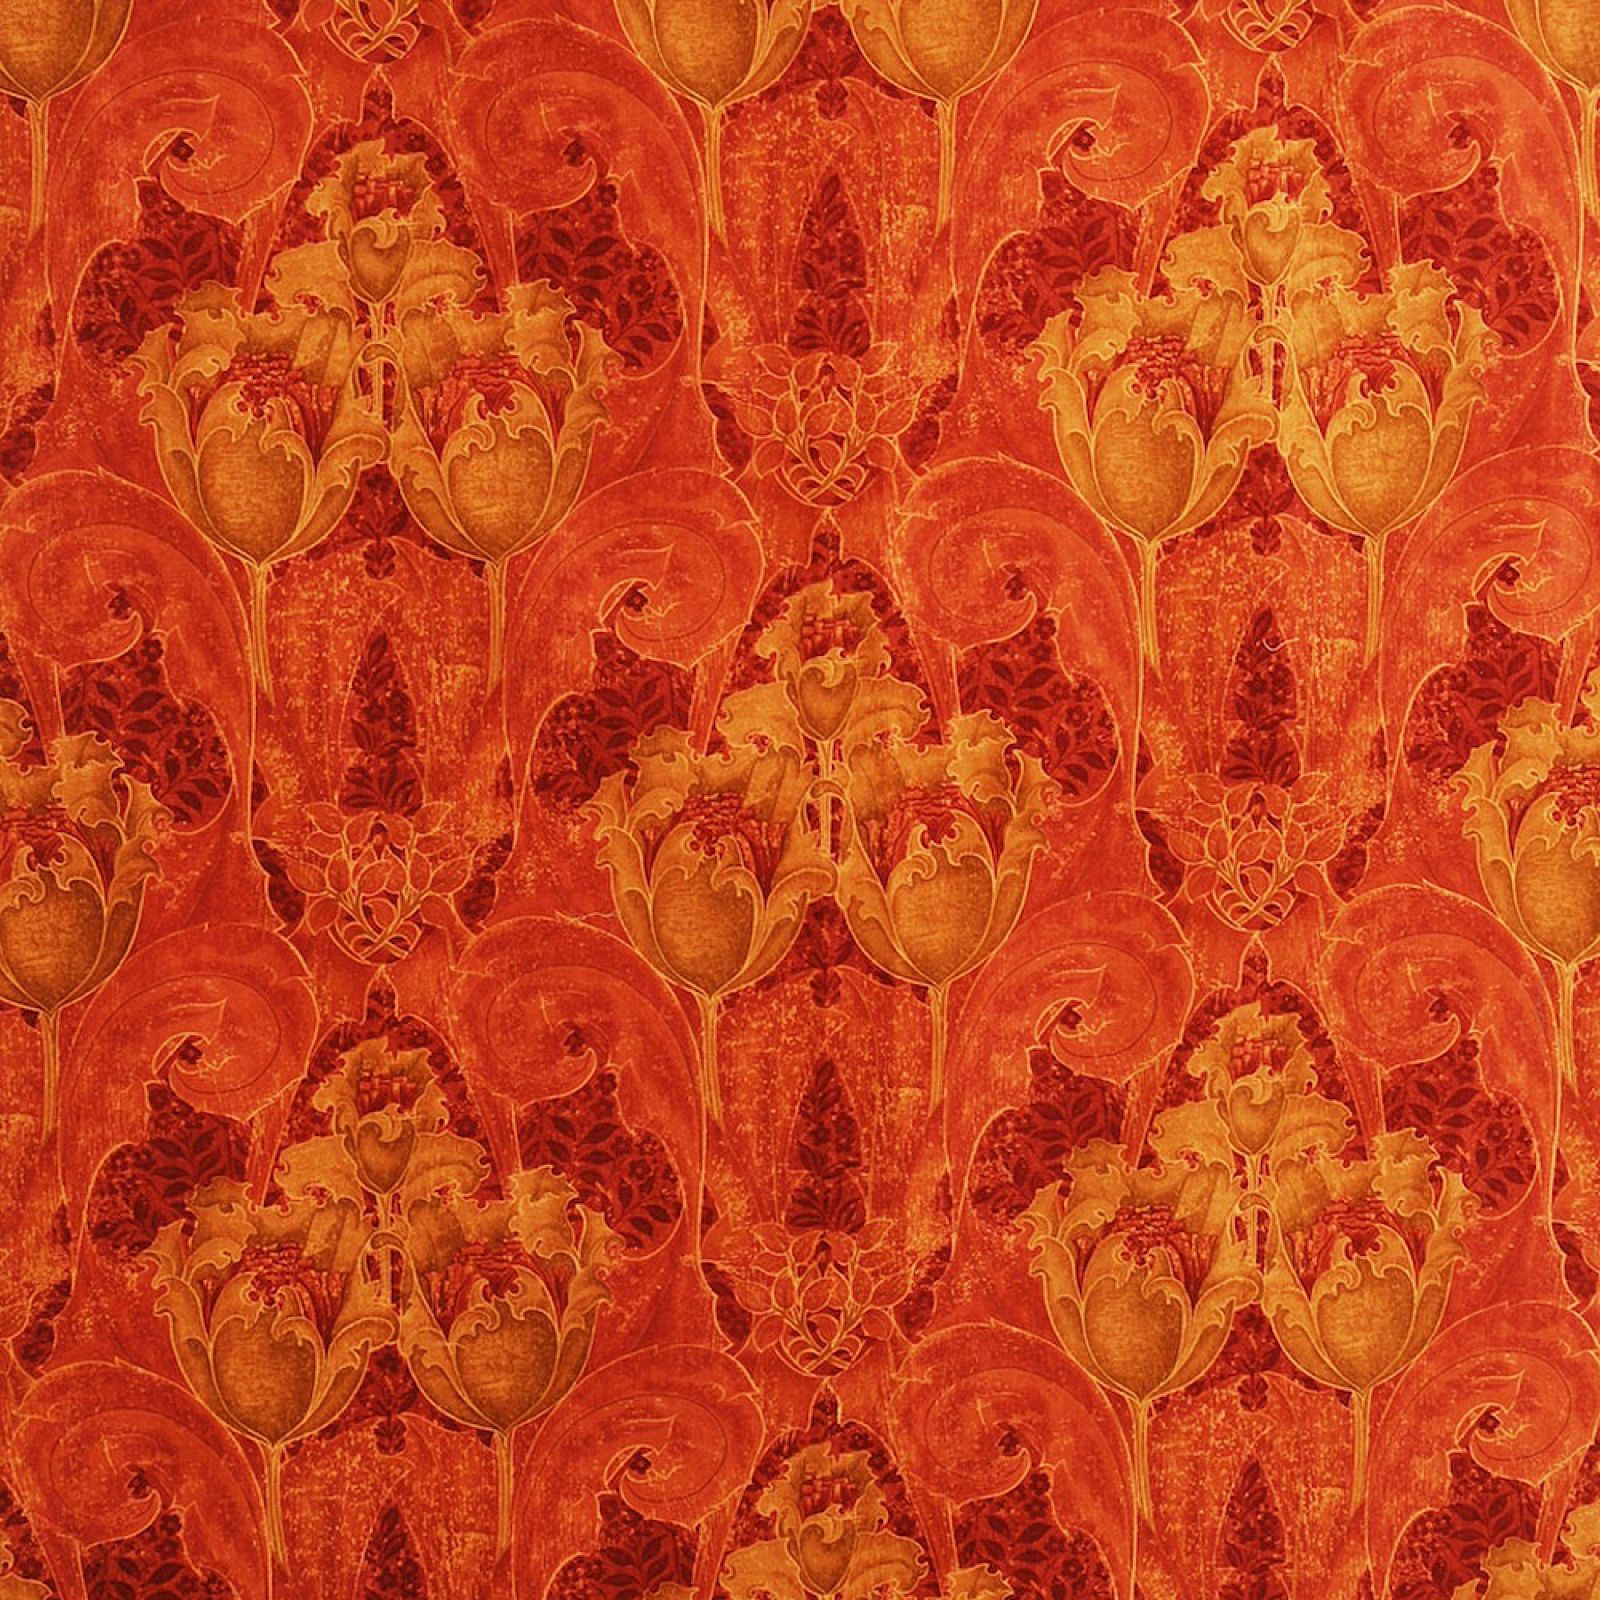 Indian Fabric Patterns